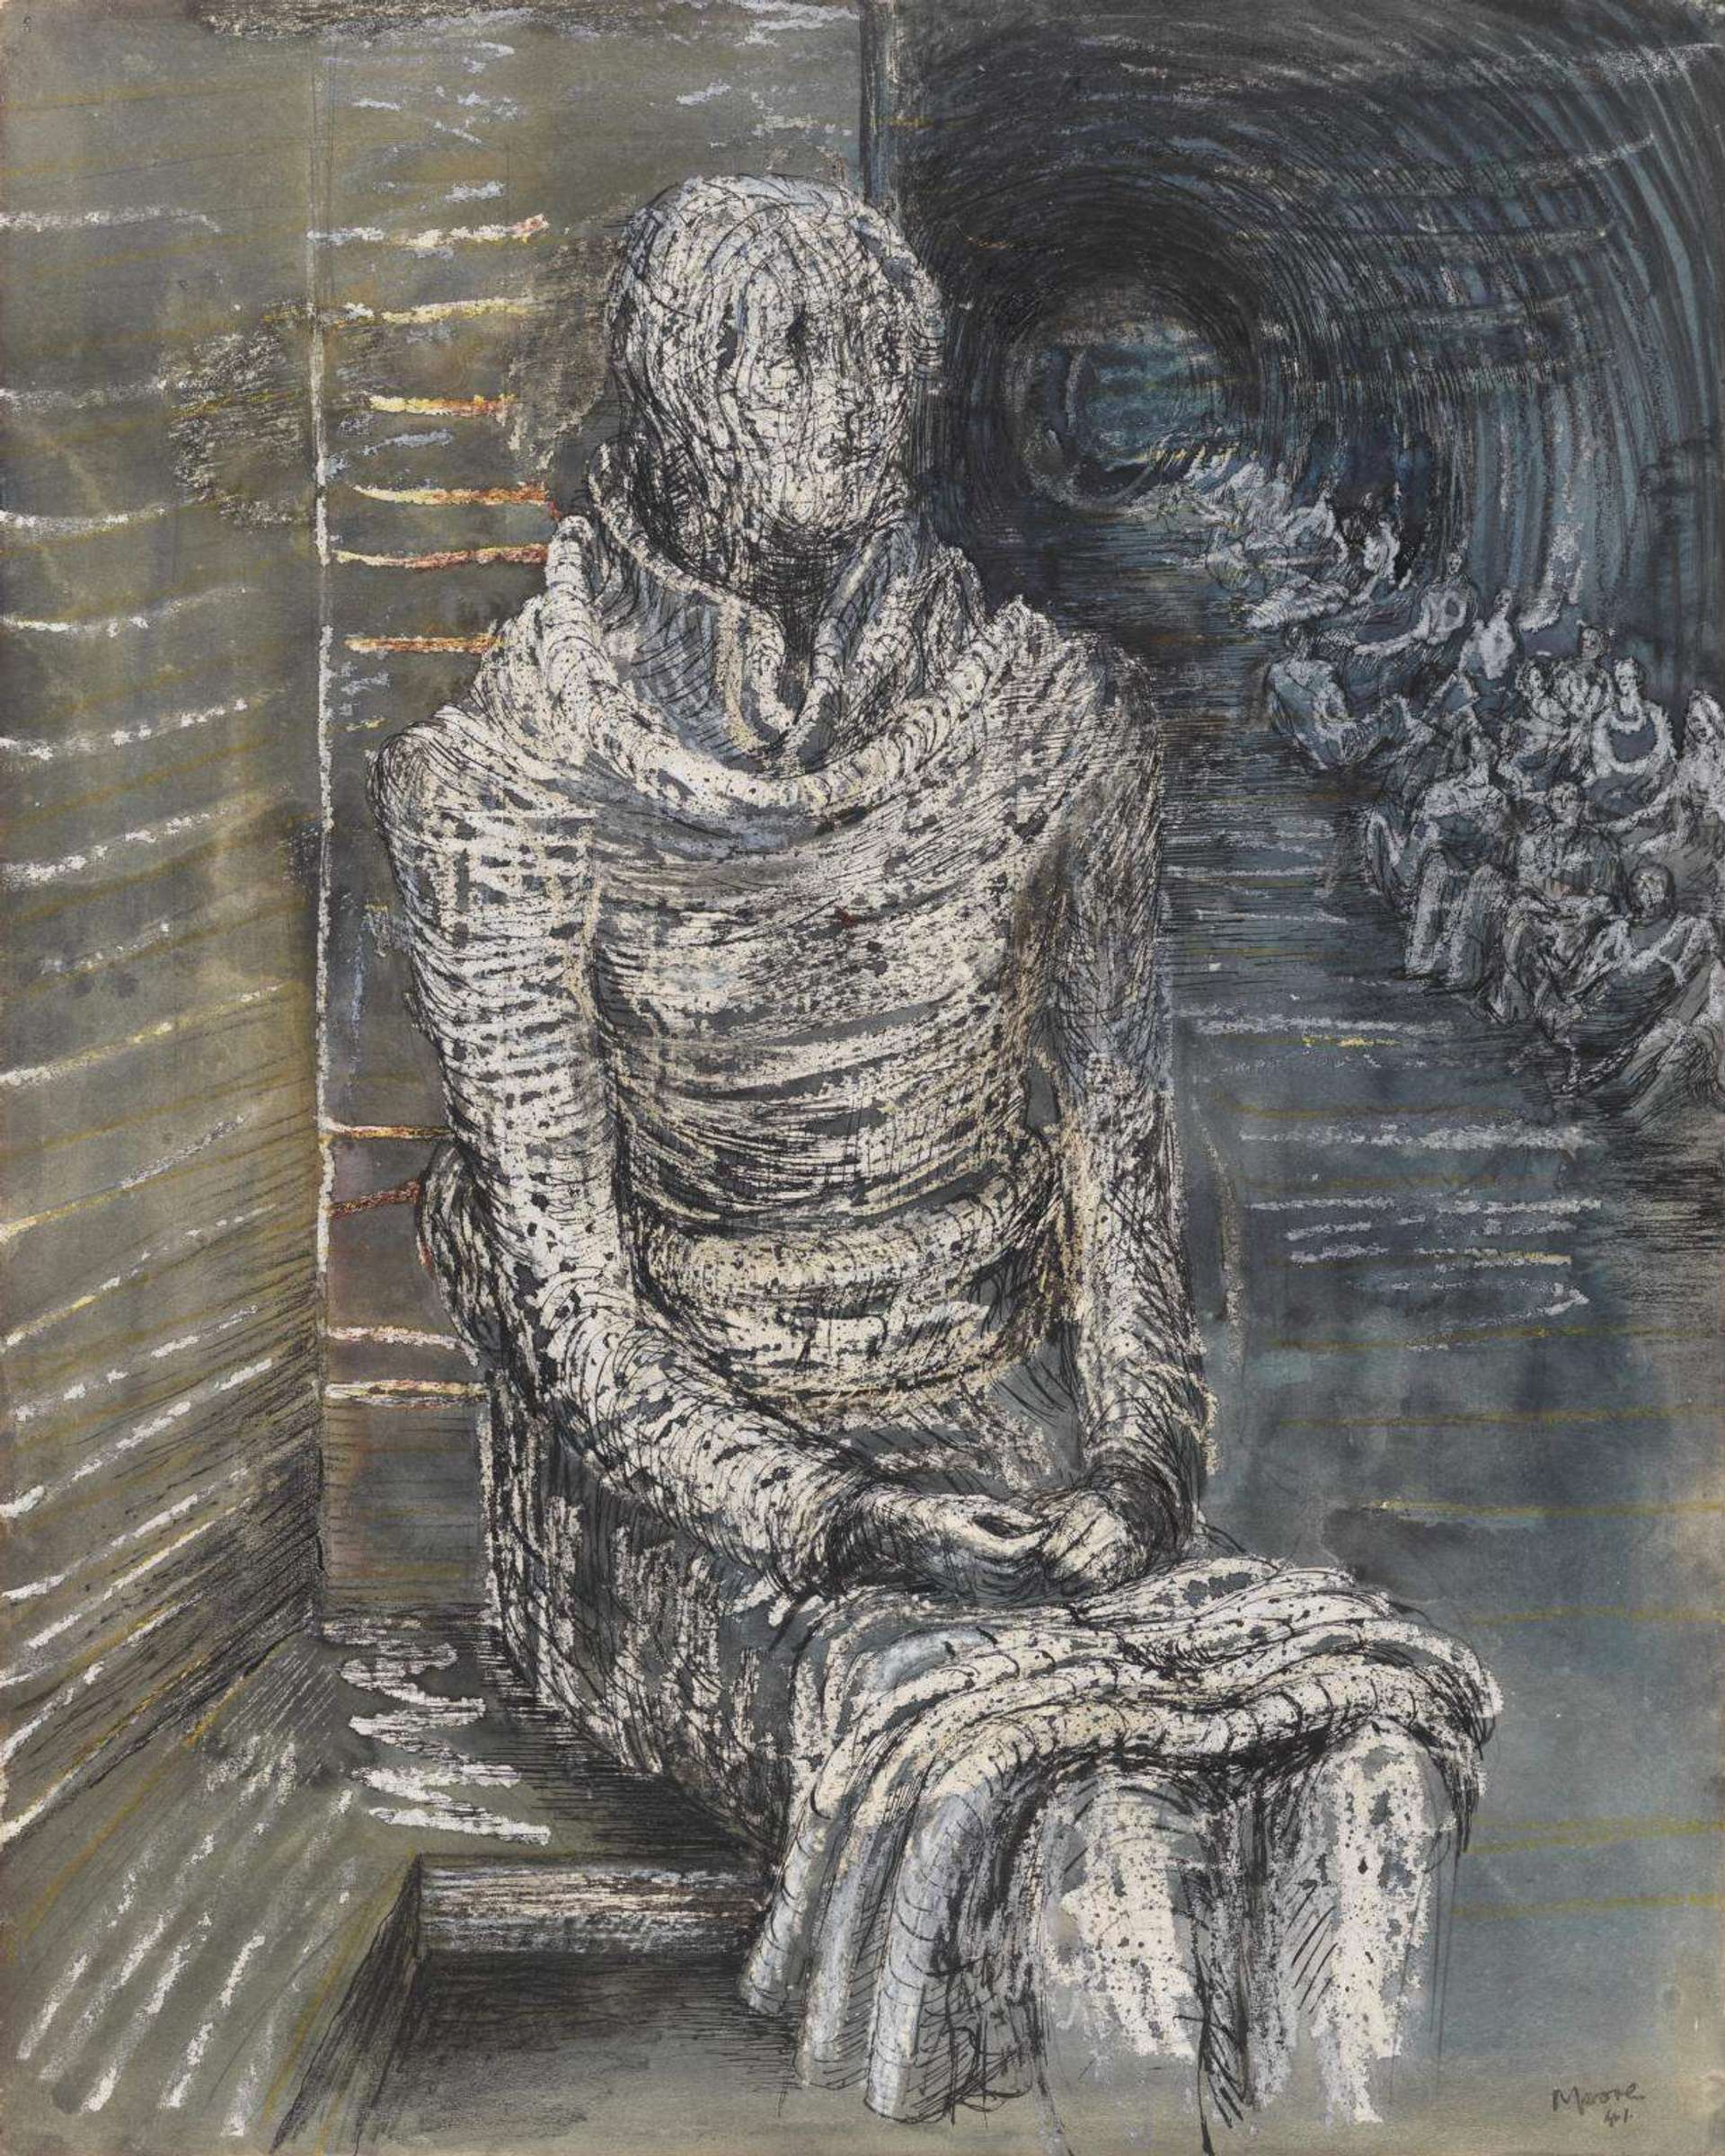 A drawing of a genderless figure, referred to as a woman based on the artwork's title, seated in a dark interior with clasped hands in the lap. A dark tunnel extends into the background on the right side, while the figure makes eye contact with the viewer.